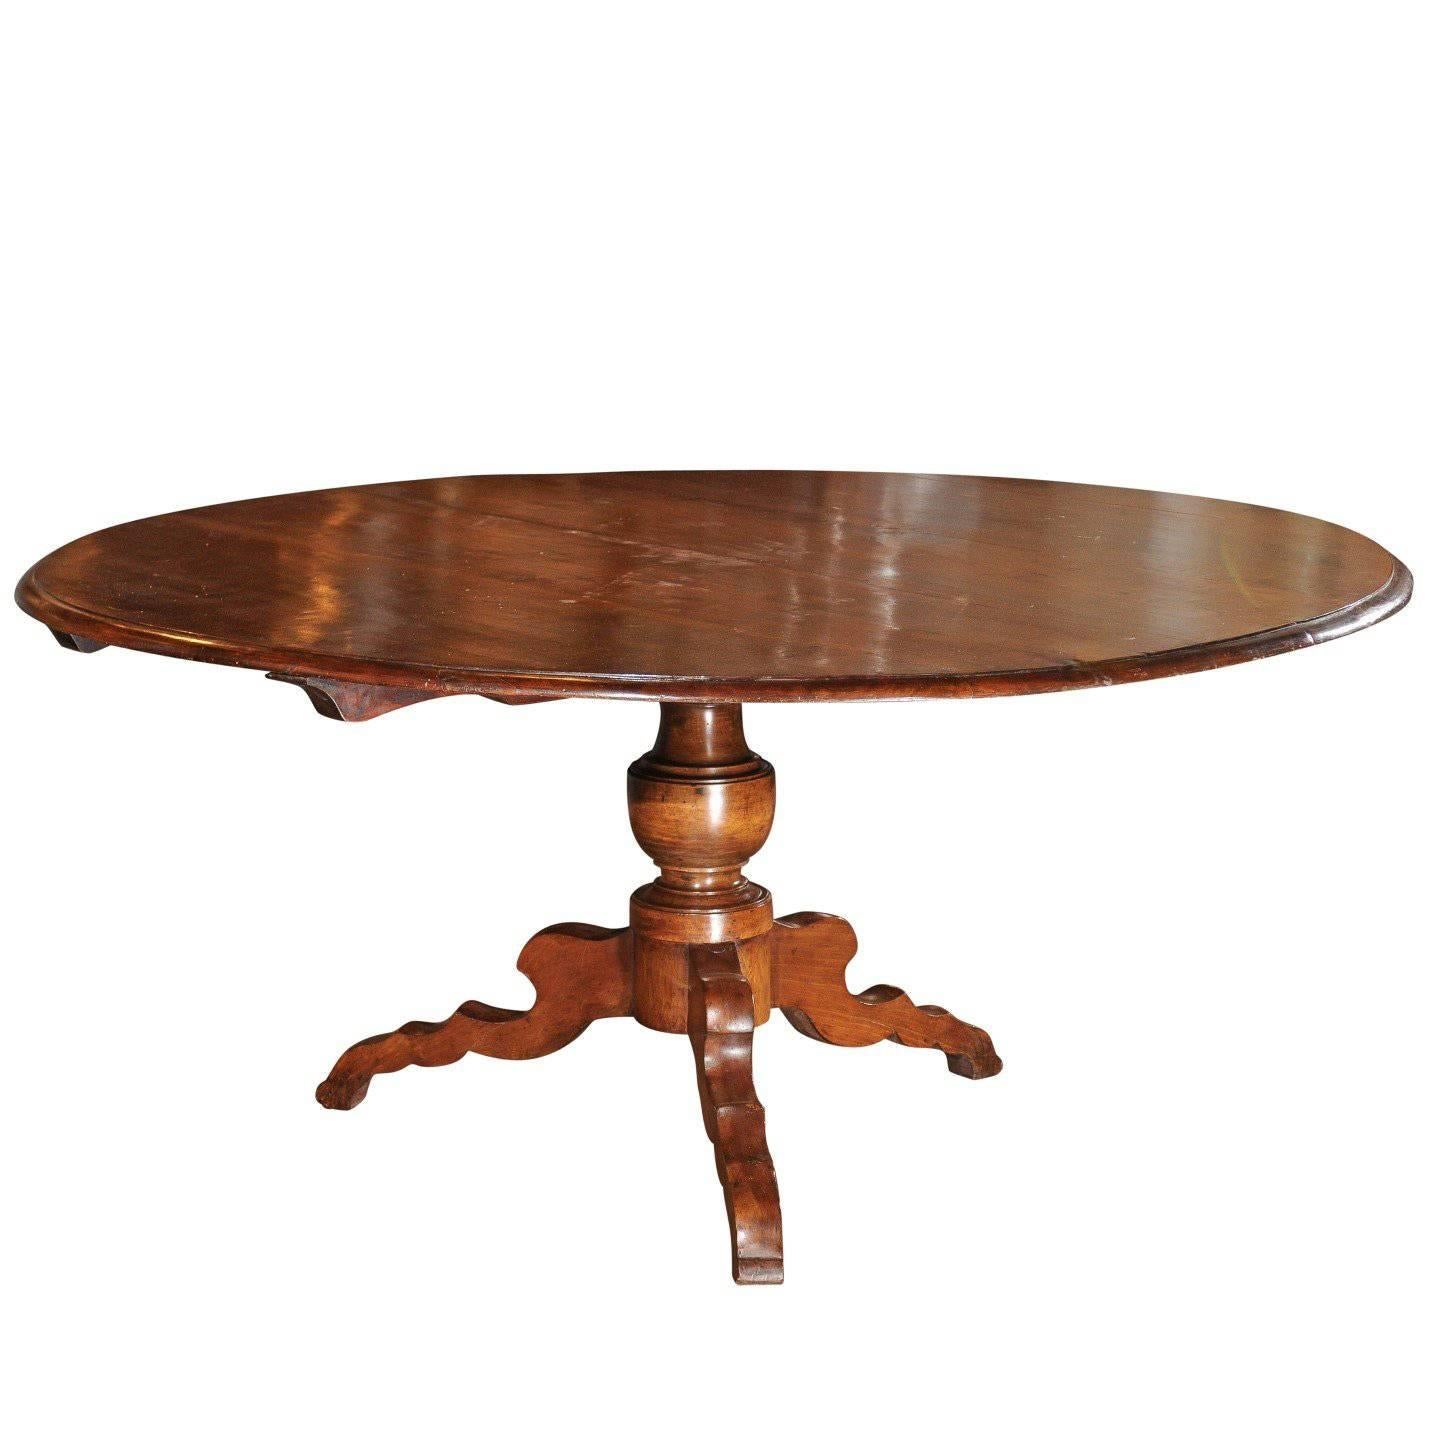 Italian Walnut Dining Table with Round Top and Pedestal Base, circa 1880